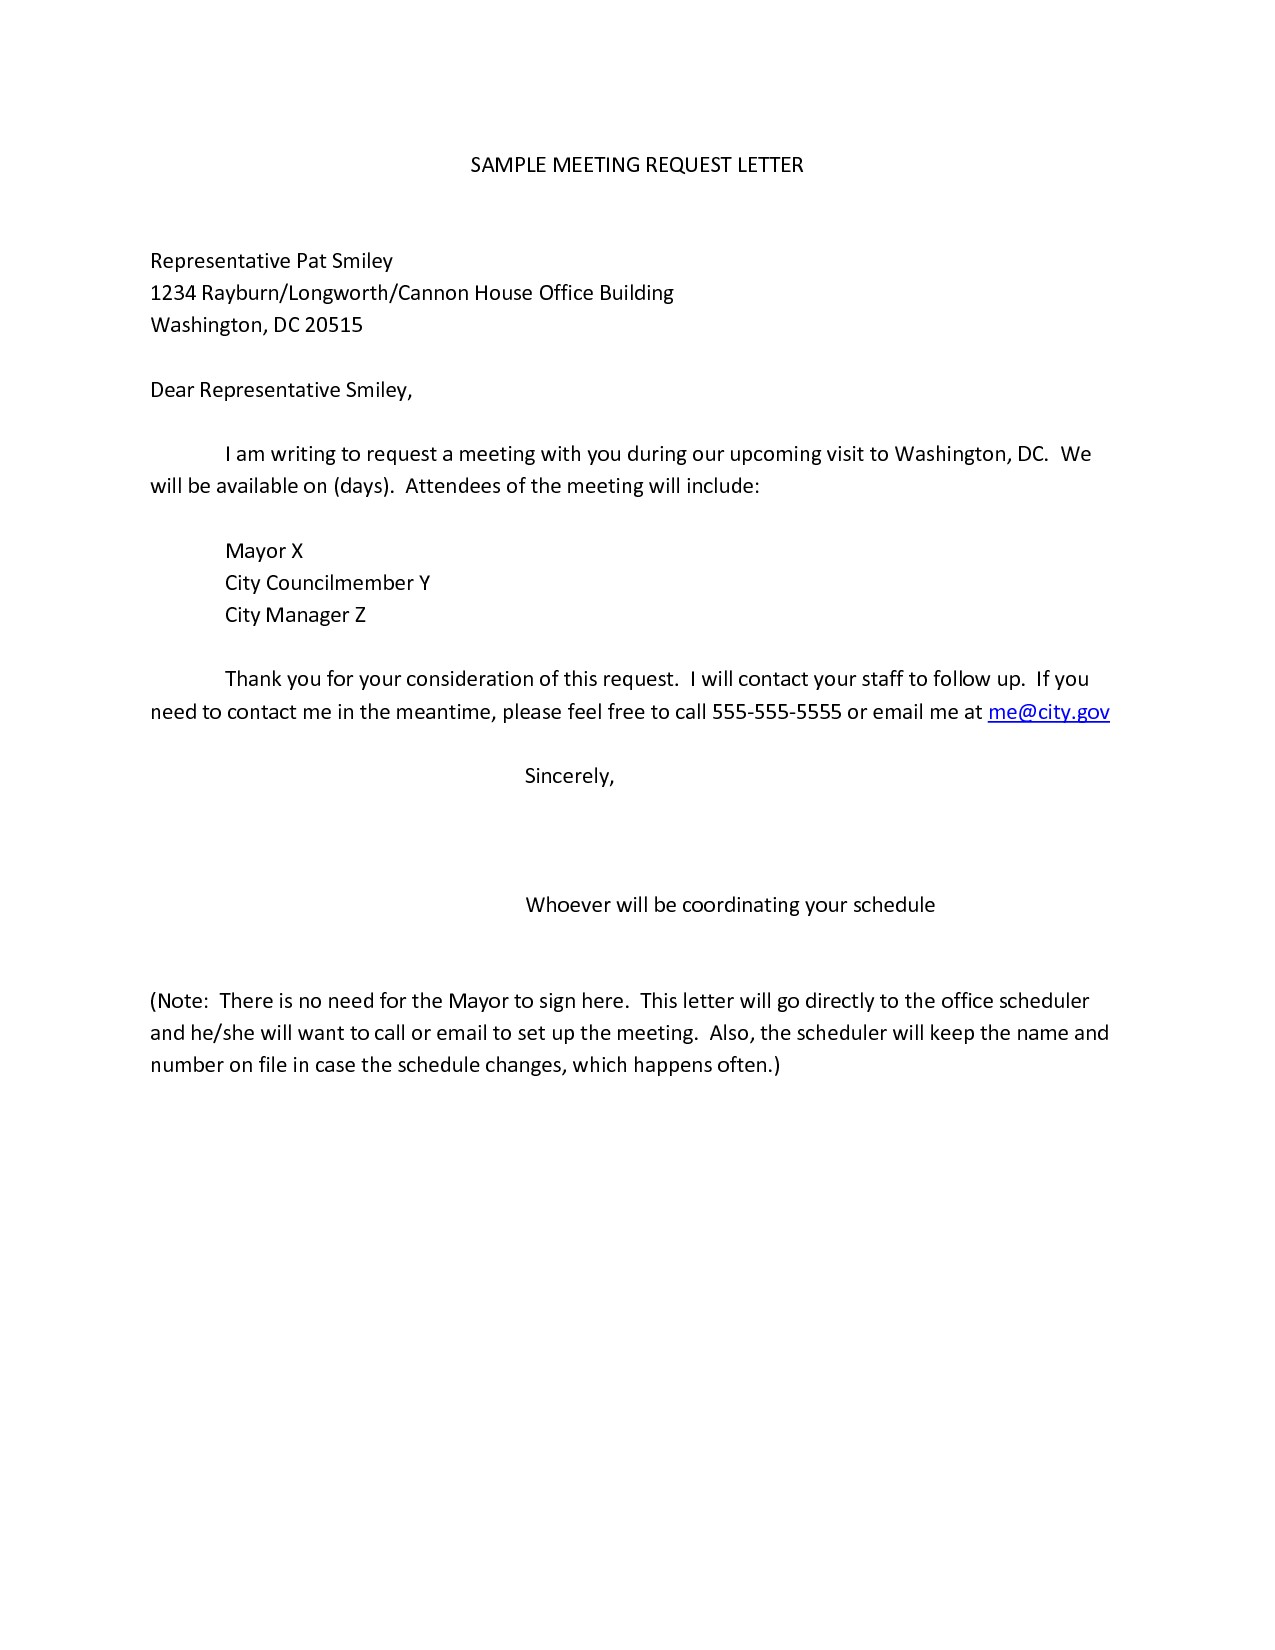 Sample Letter To Request A Meeting With Manager Scrumps Document Email